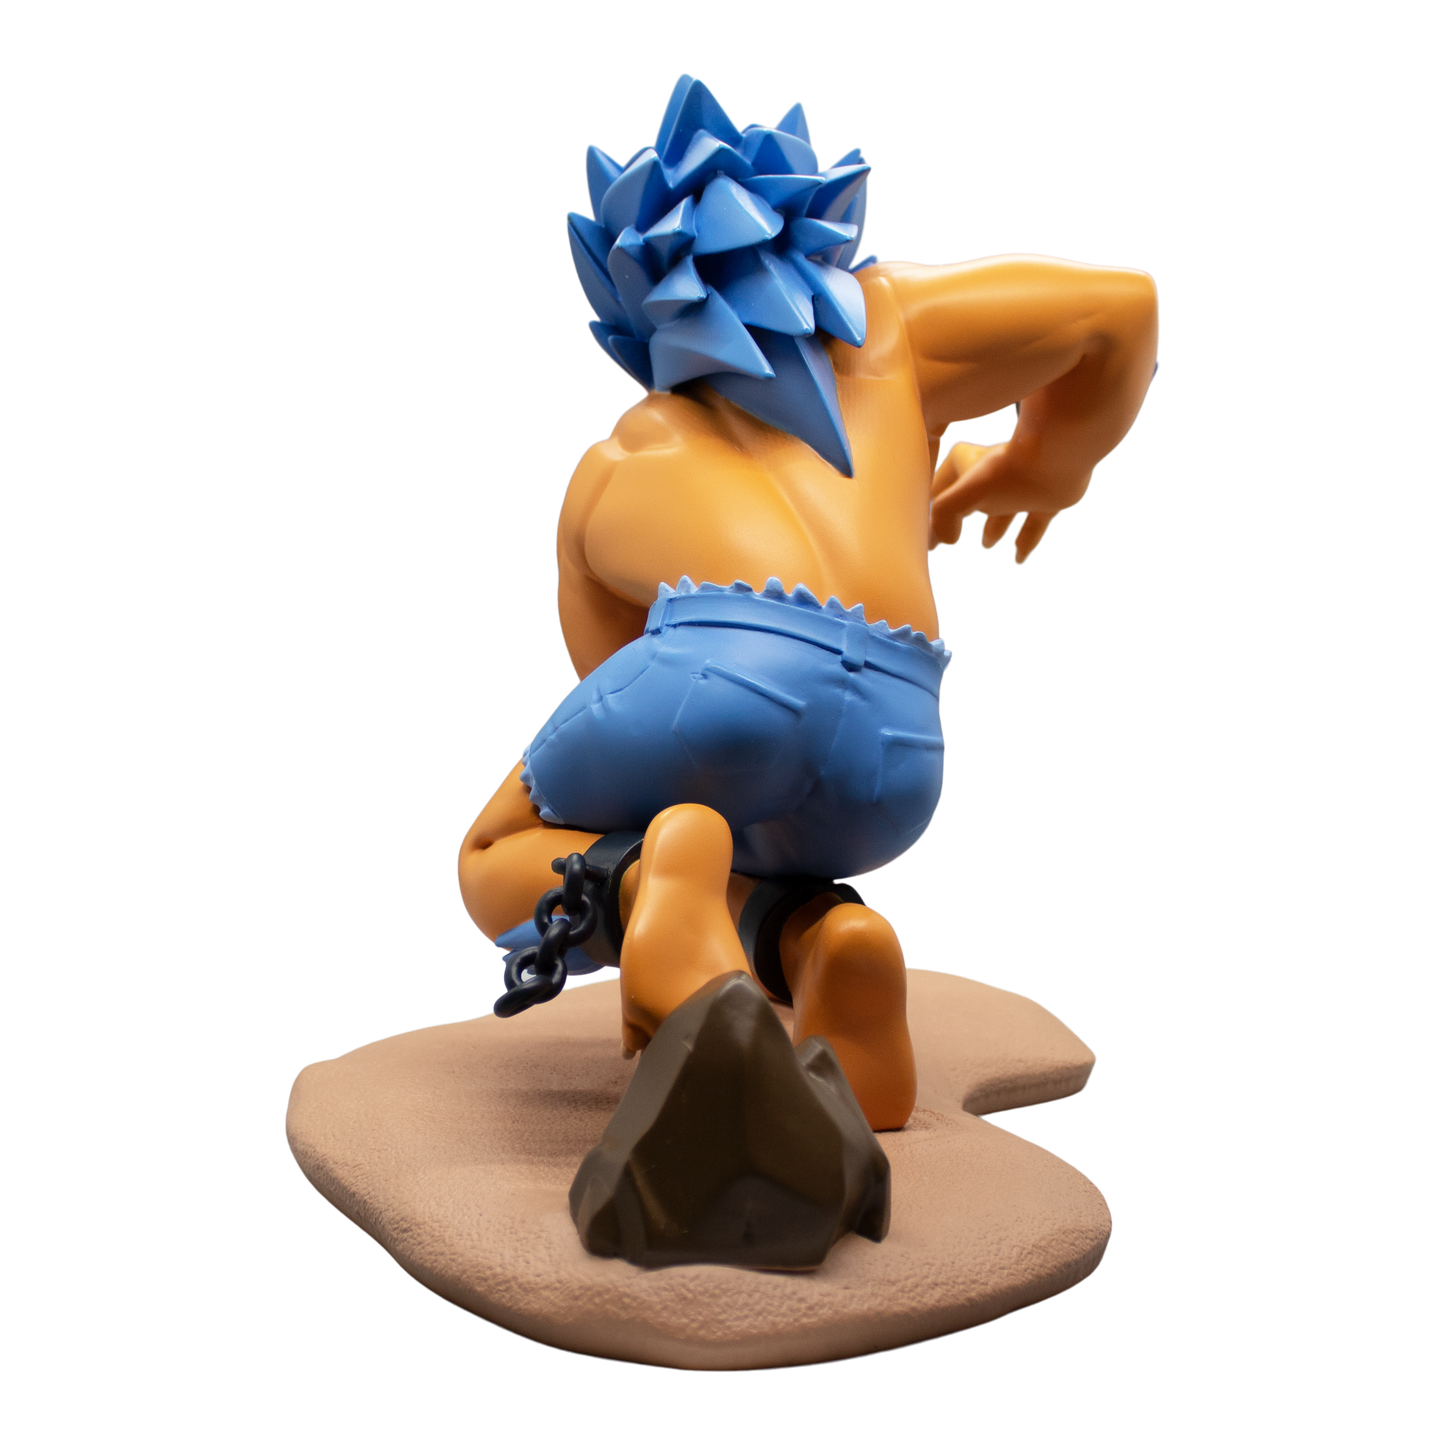 Street Fighter Blanka Player 2 Unleashed Designer Polystone Statue - Available 1st Quarter 2022 - Icon Heroes 